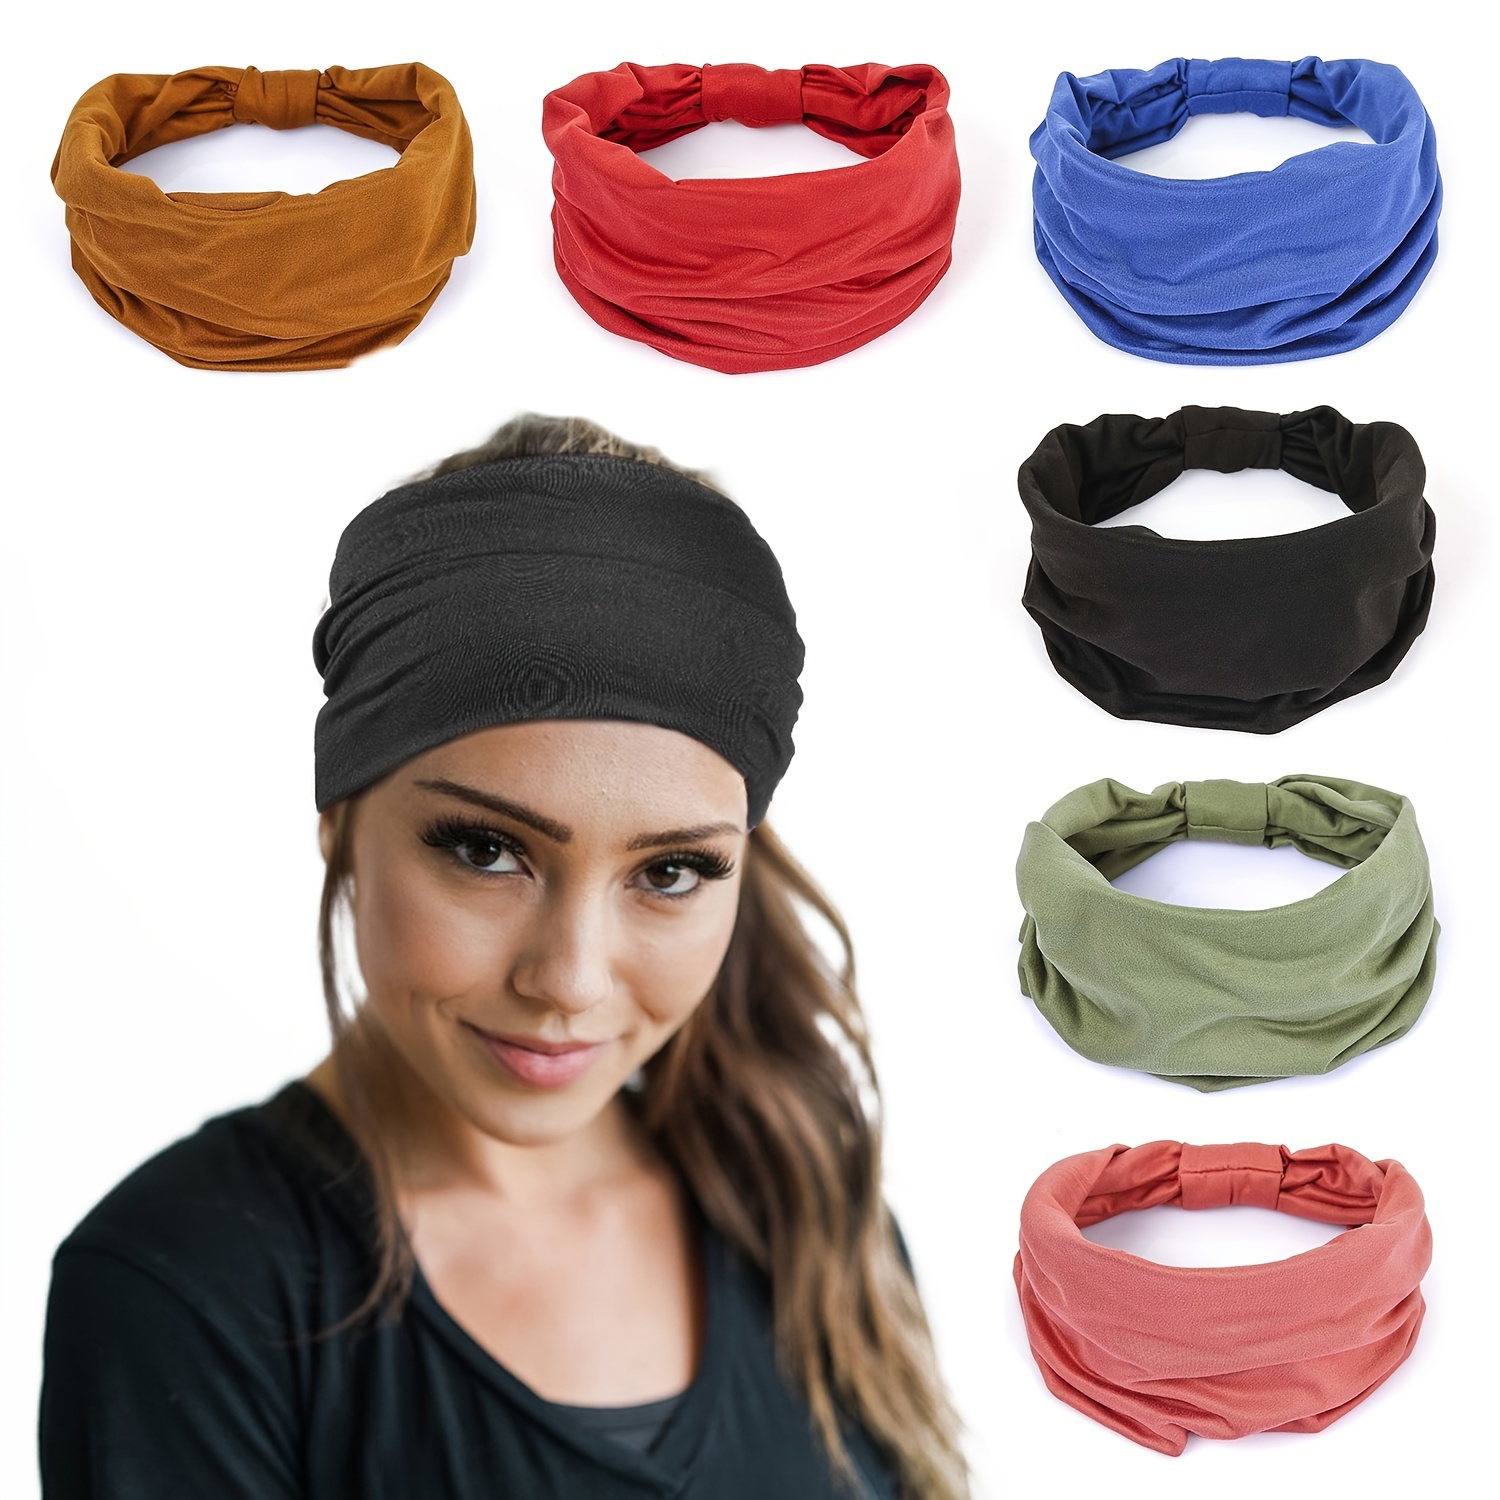 

6pcs Wide Headbands For Women Non Slip Soft Elastic Hair Bands Yoga Running Sports Workout Gym Head Wraps, Knotted Cotton Cloth African Turbans Bandana